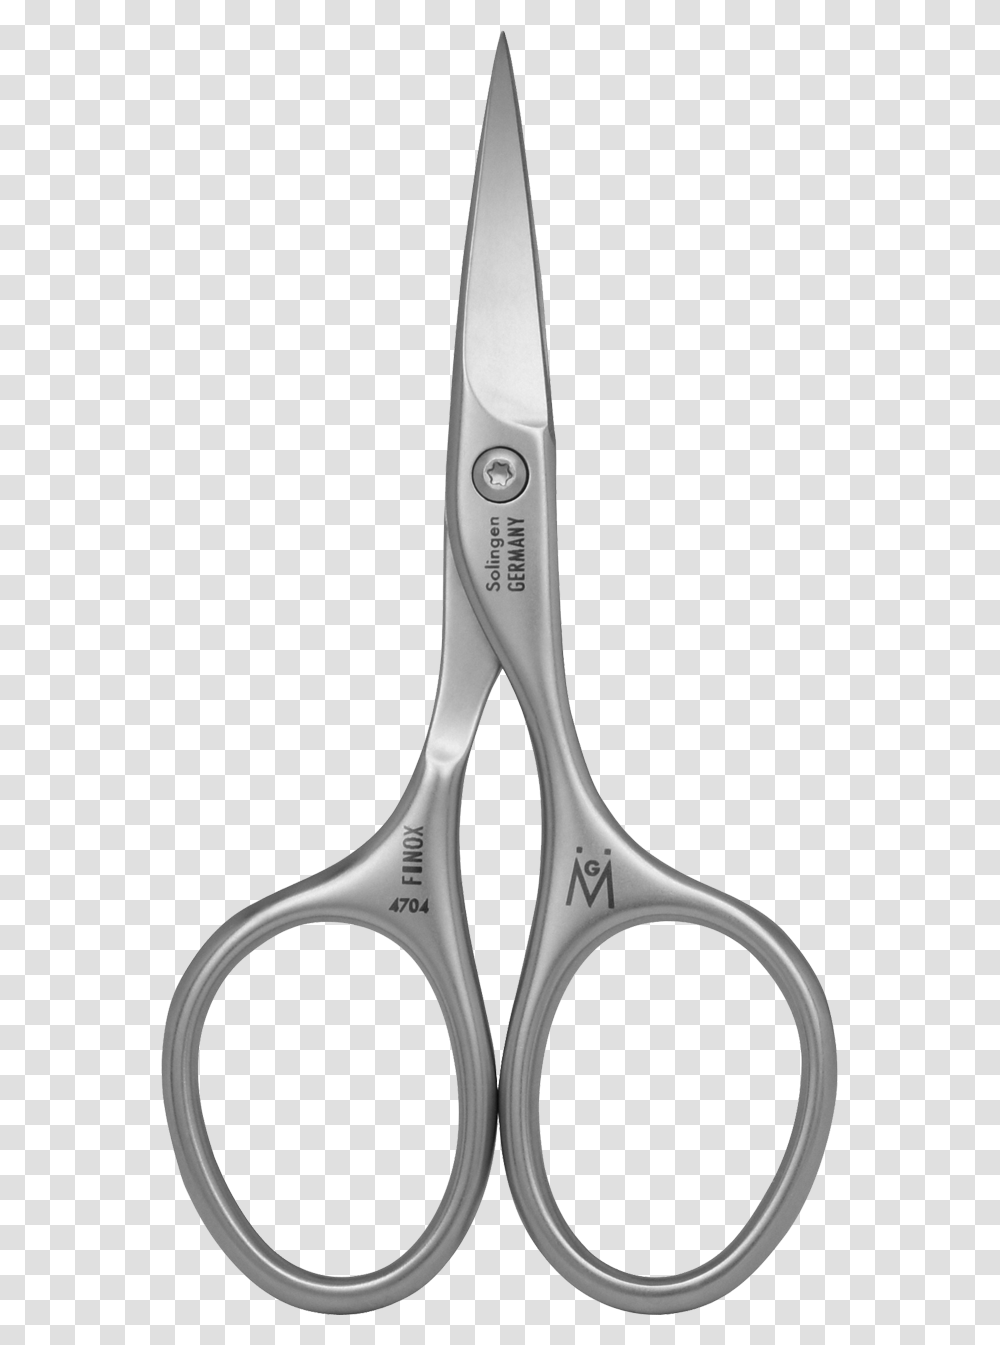 Germanikure Nail Scissors, Weapon, Weaponry, Blade, Shears Transparent Png